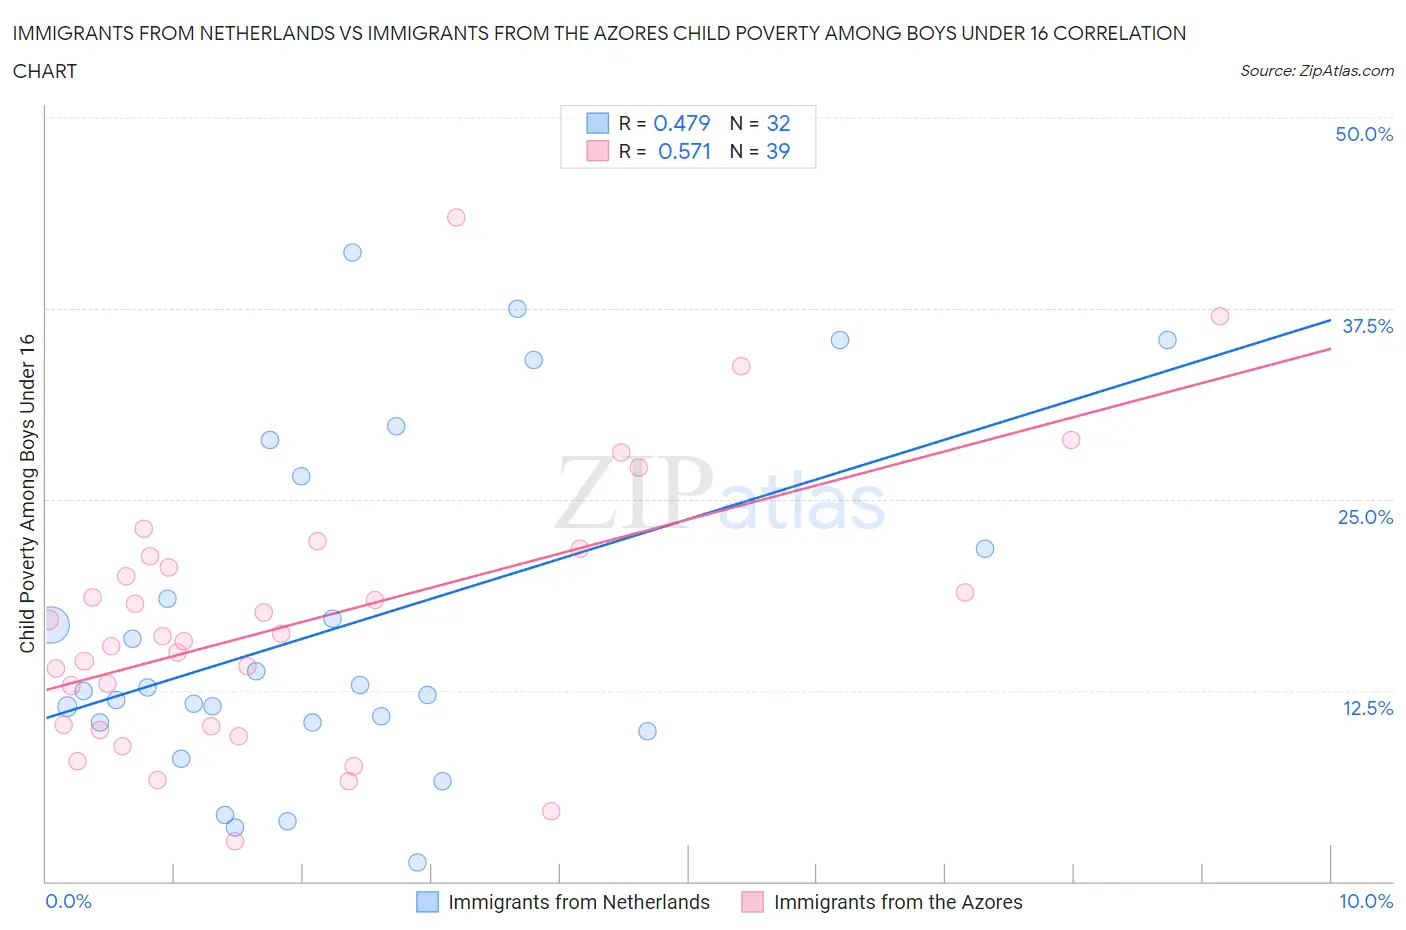 Immigrants from Netherlands vs Immigrants from the Azores Child Poverty Among Boys Under 16